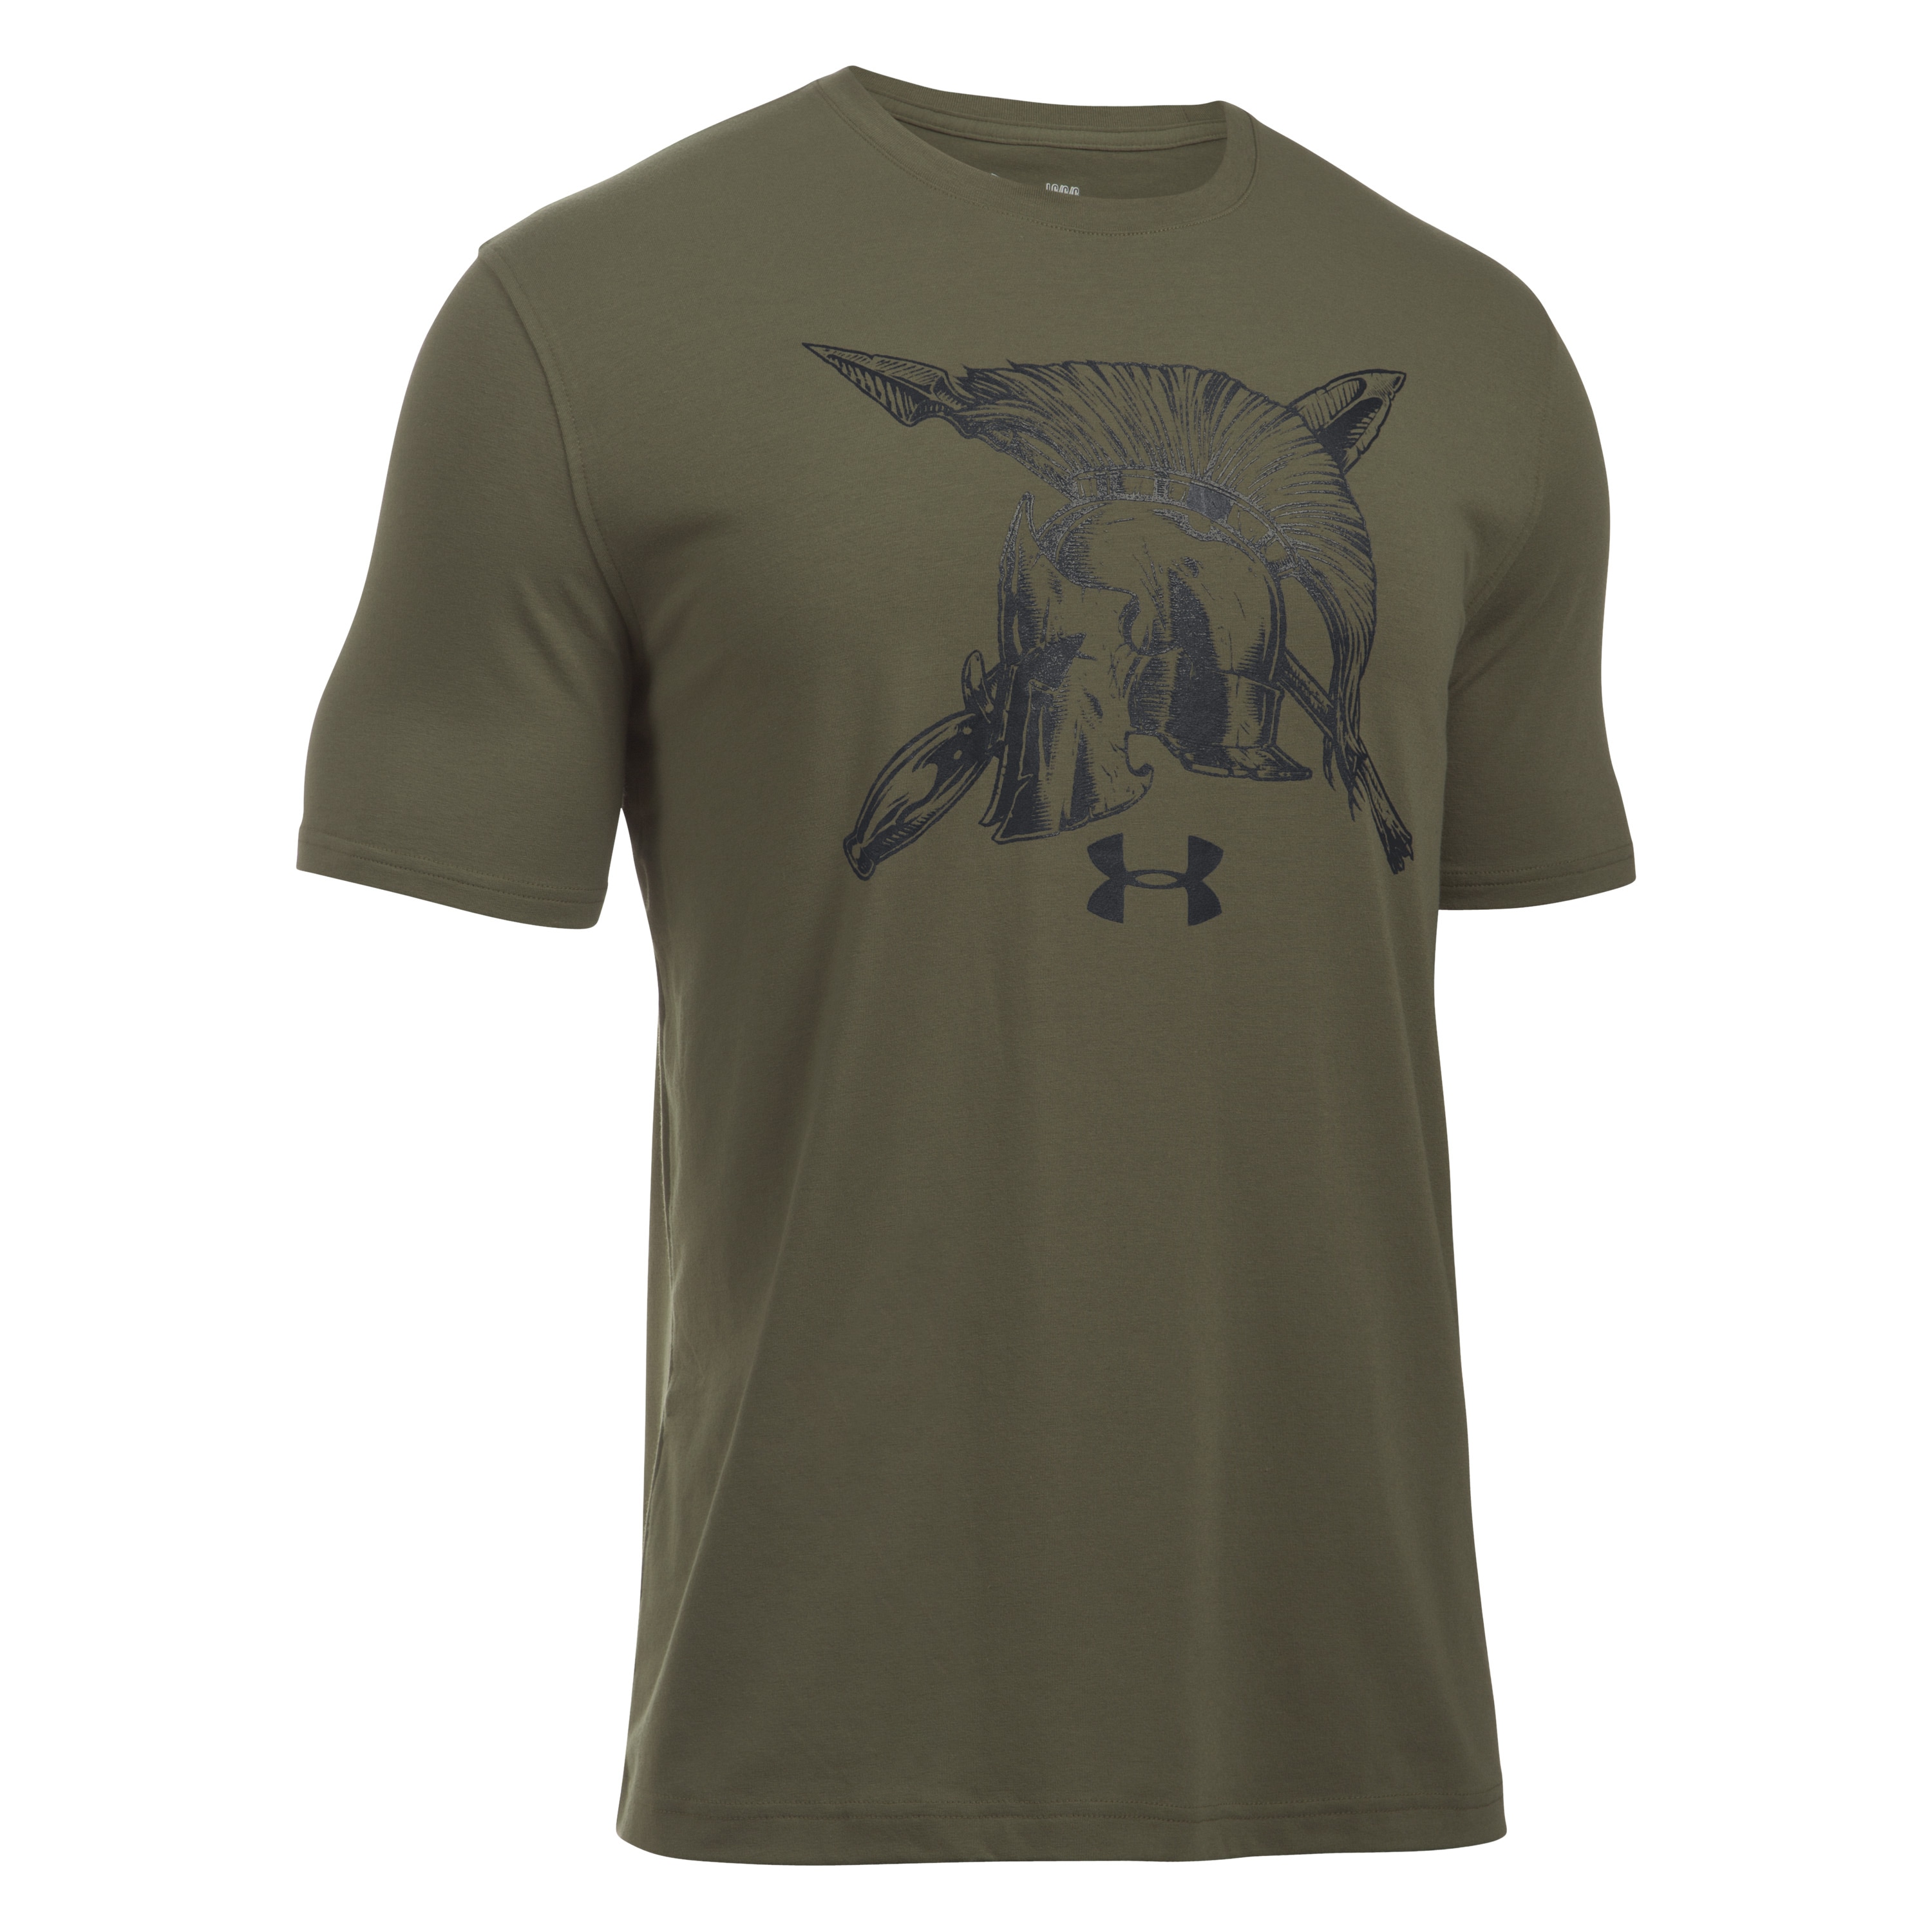 Under Armour T-Shirt Tactical Spartan T olive